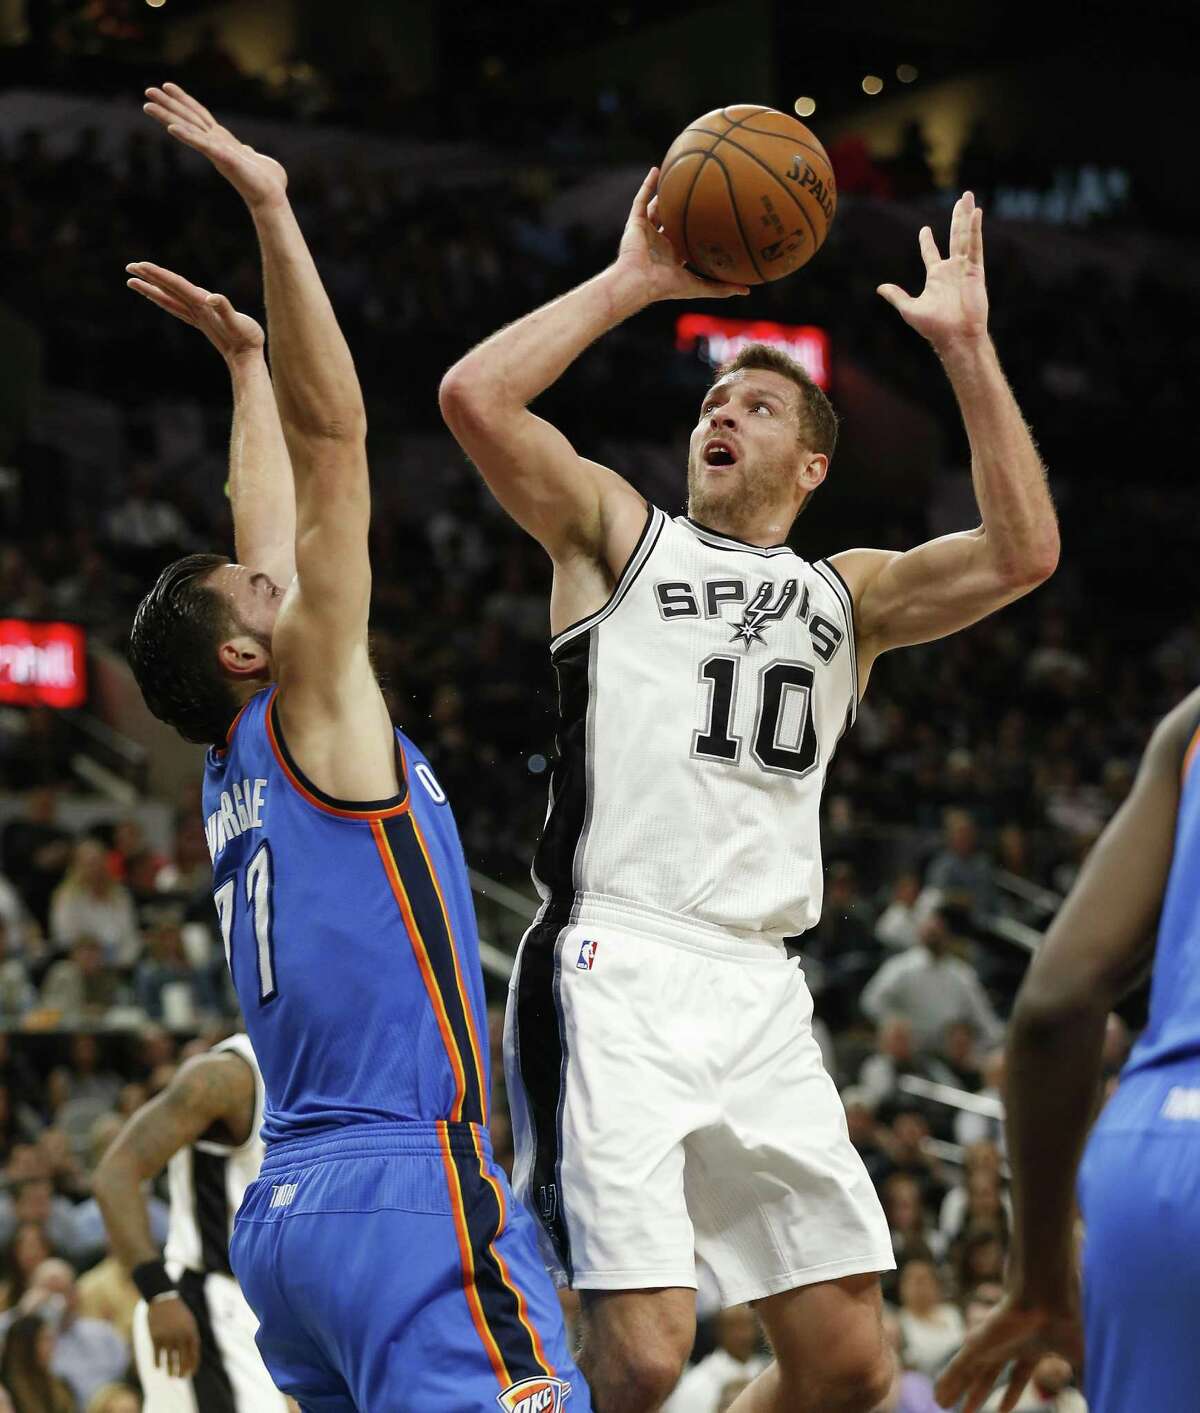 David Lee shoots against Oklahoma City’s Joffrey Lauvergne on Jan. 31. The Spurs blew a big lead but rallied to win 108-94 as Lee contributed seven points and seven rebounds.